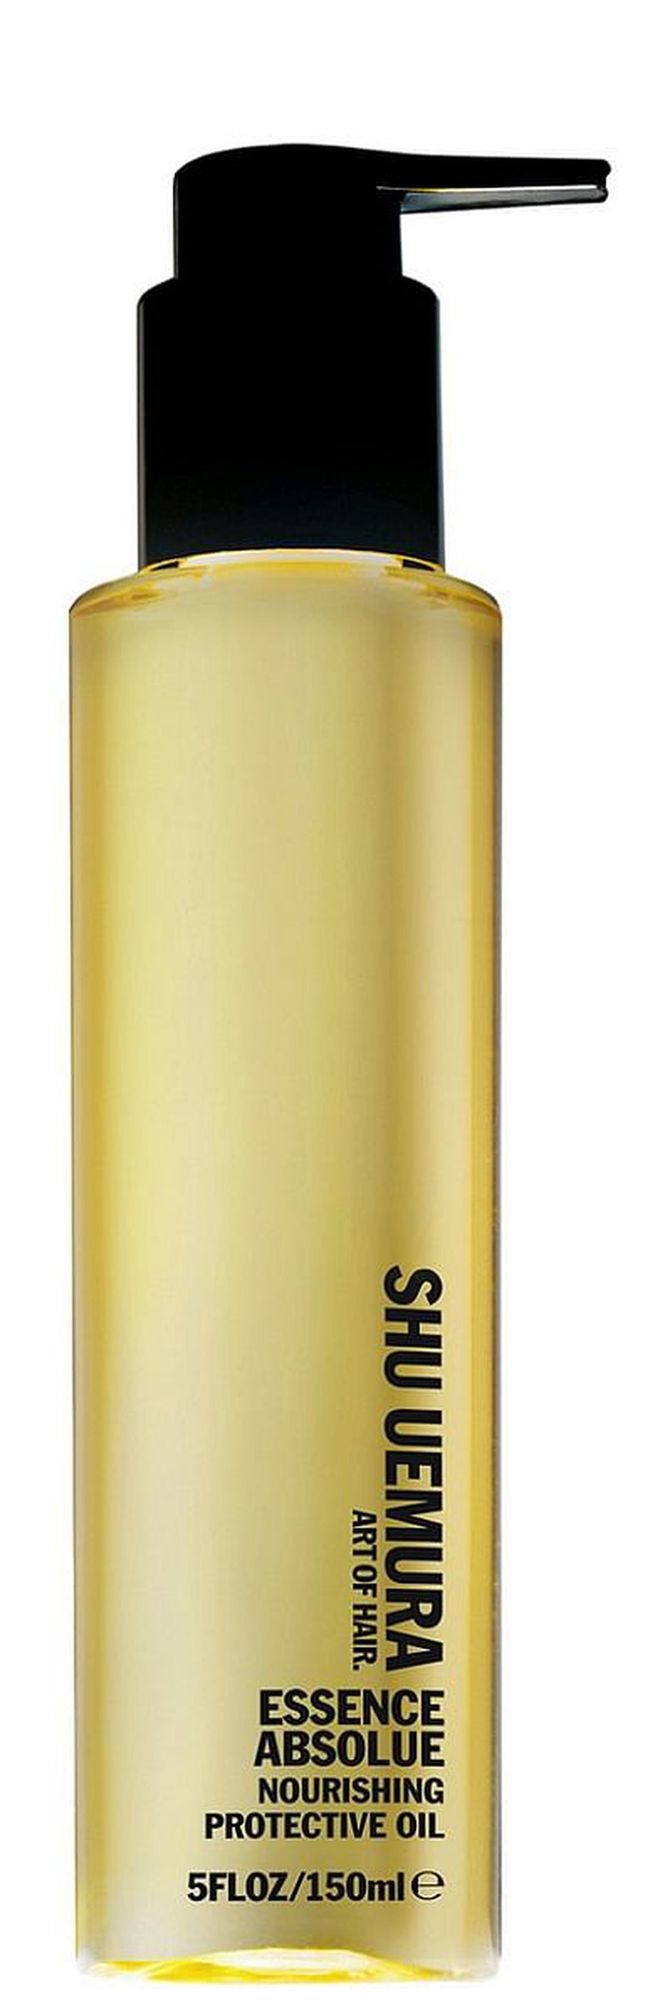 Perfect for coloured and fine hair, this weightless hair serum contains camellia oil to rebalance hair's moisture level and protect it against UV, heat and humidity